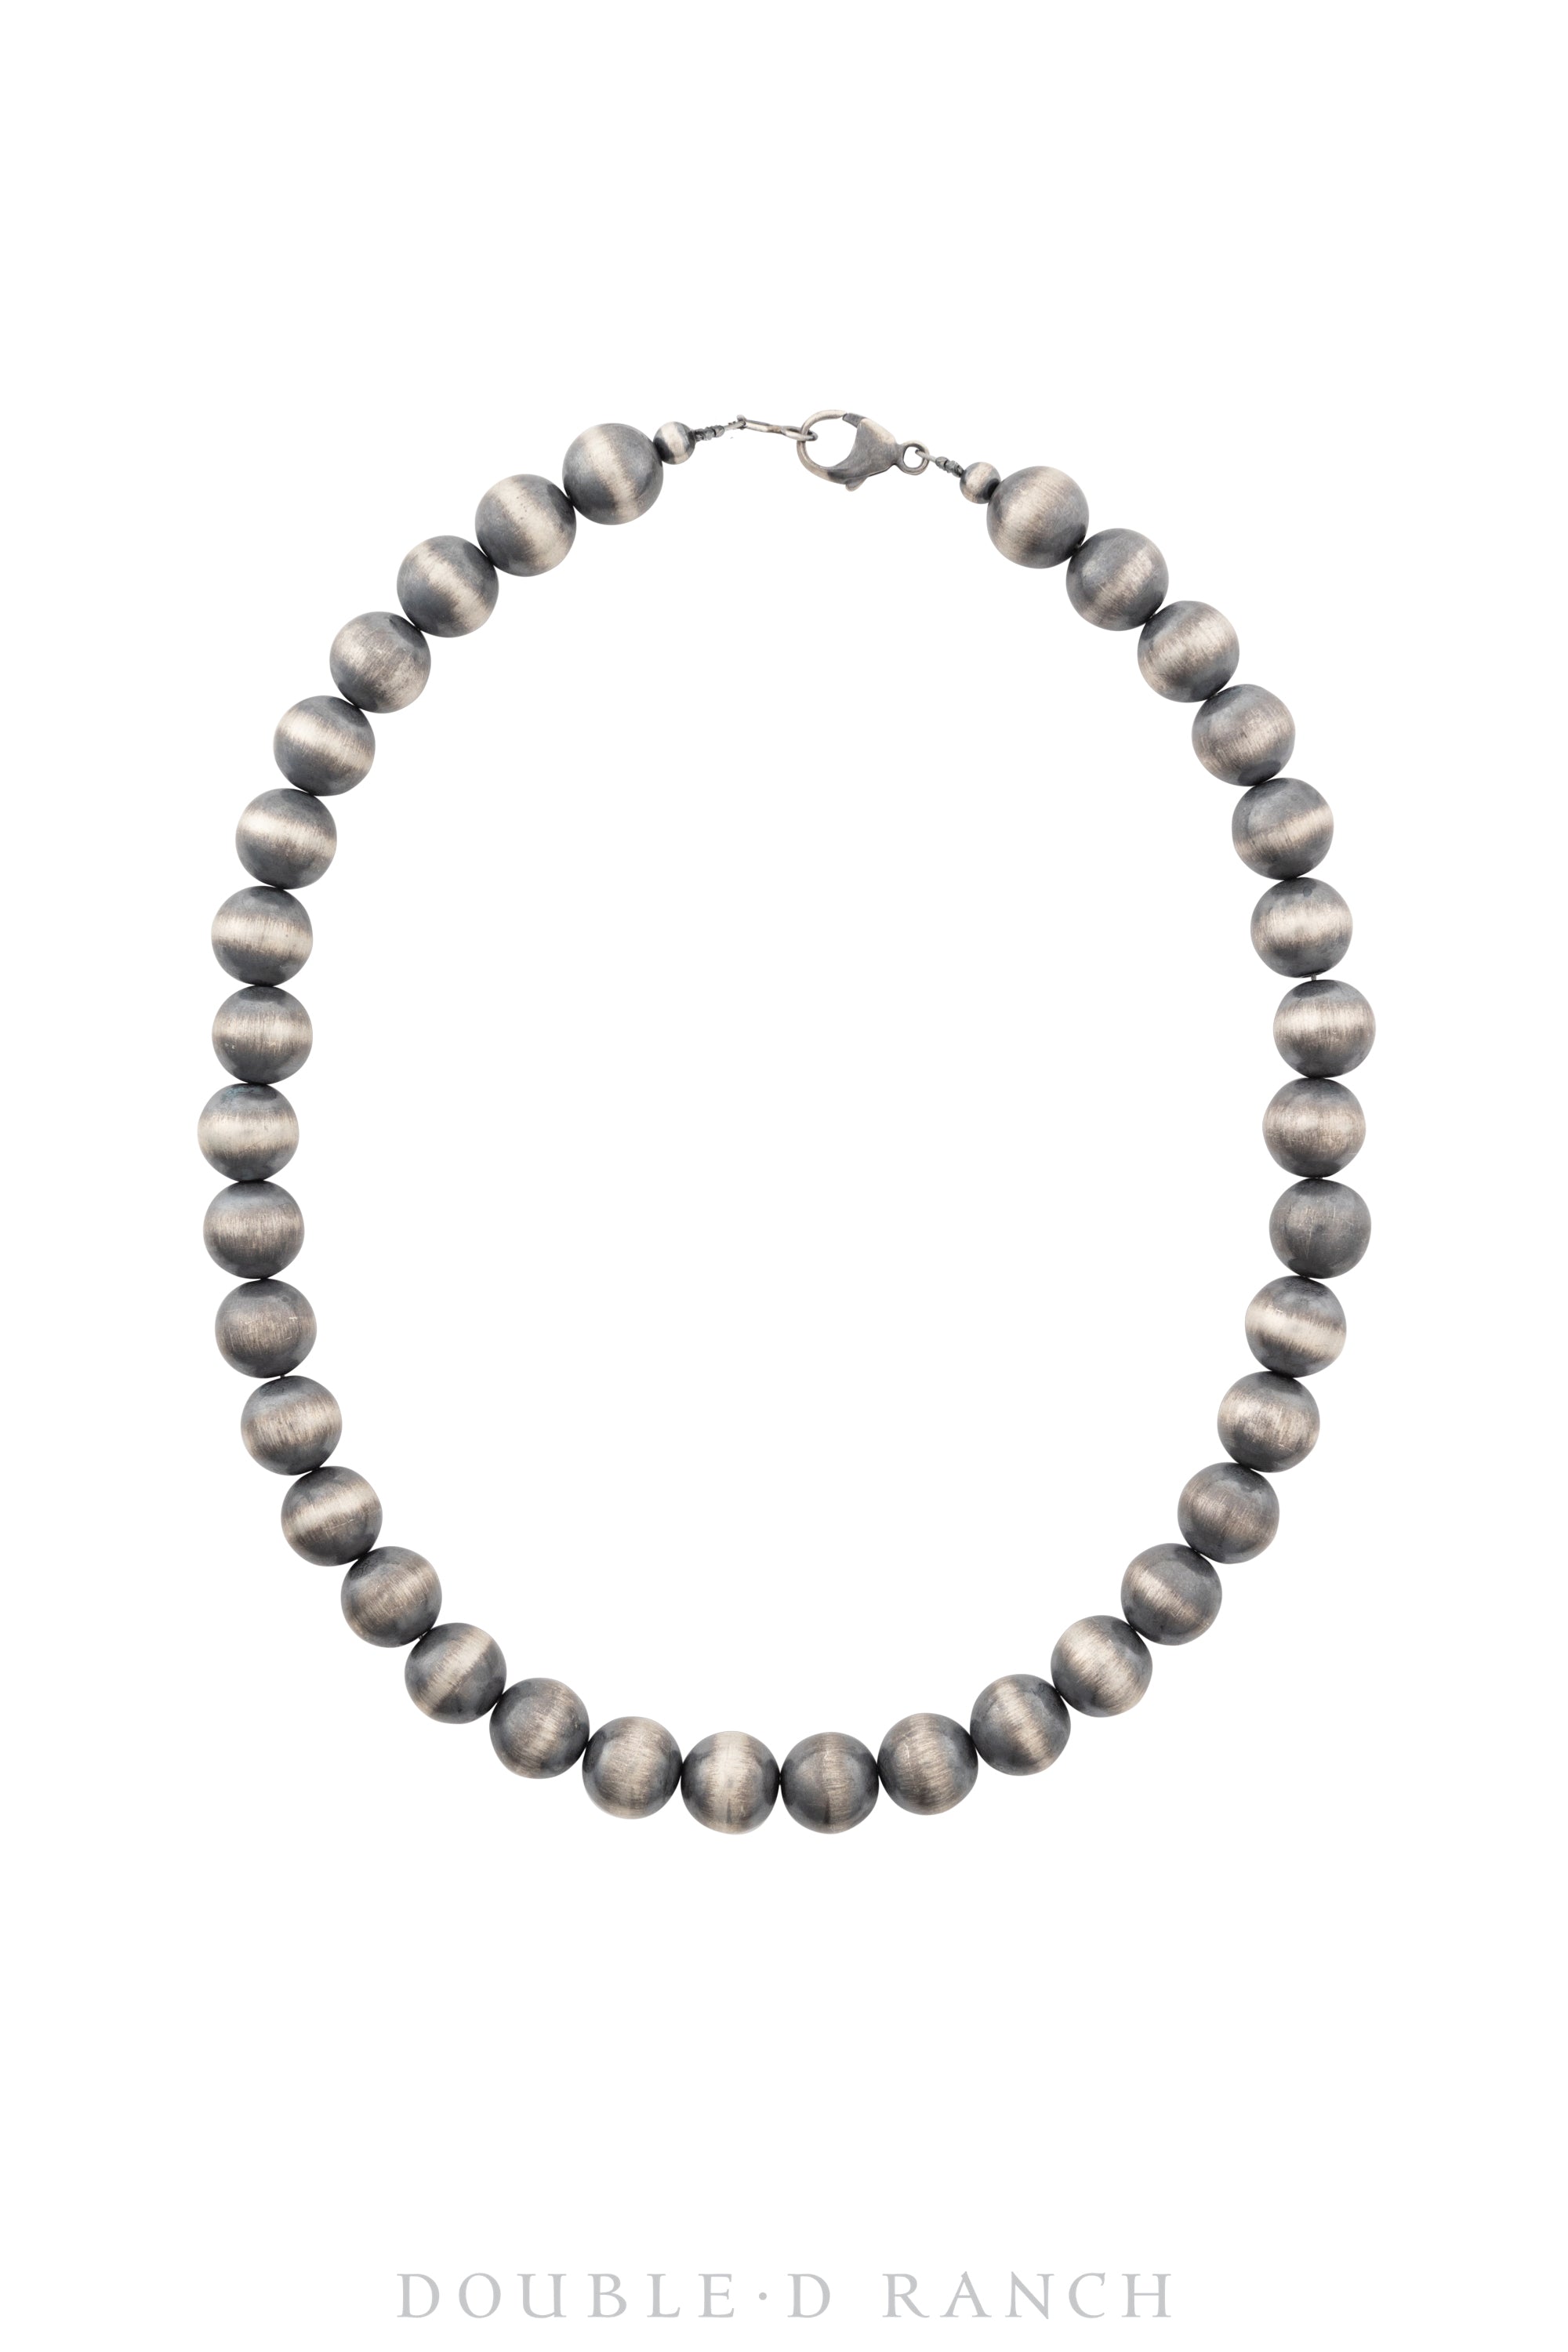 Necklace, Desert Pearls, Sterling Silver, Contemporary 18", 3070